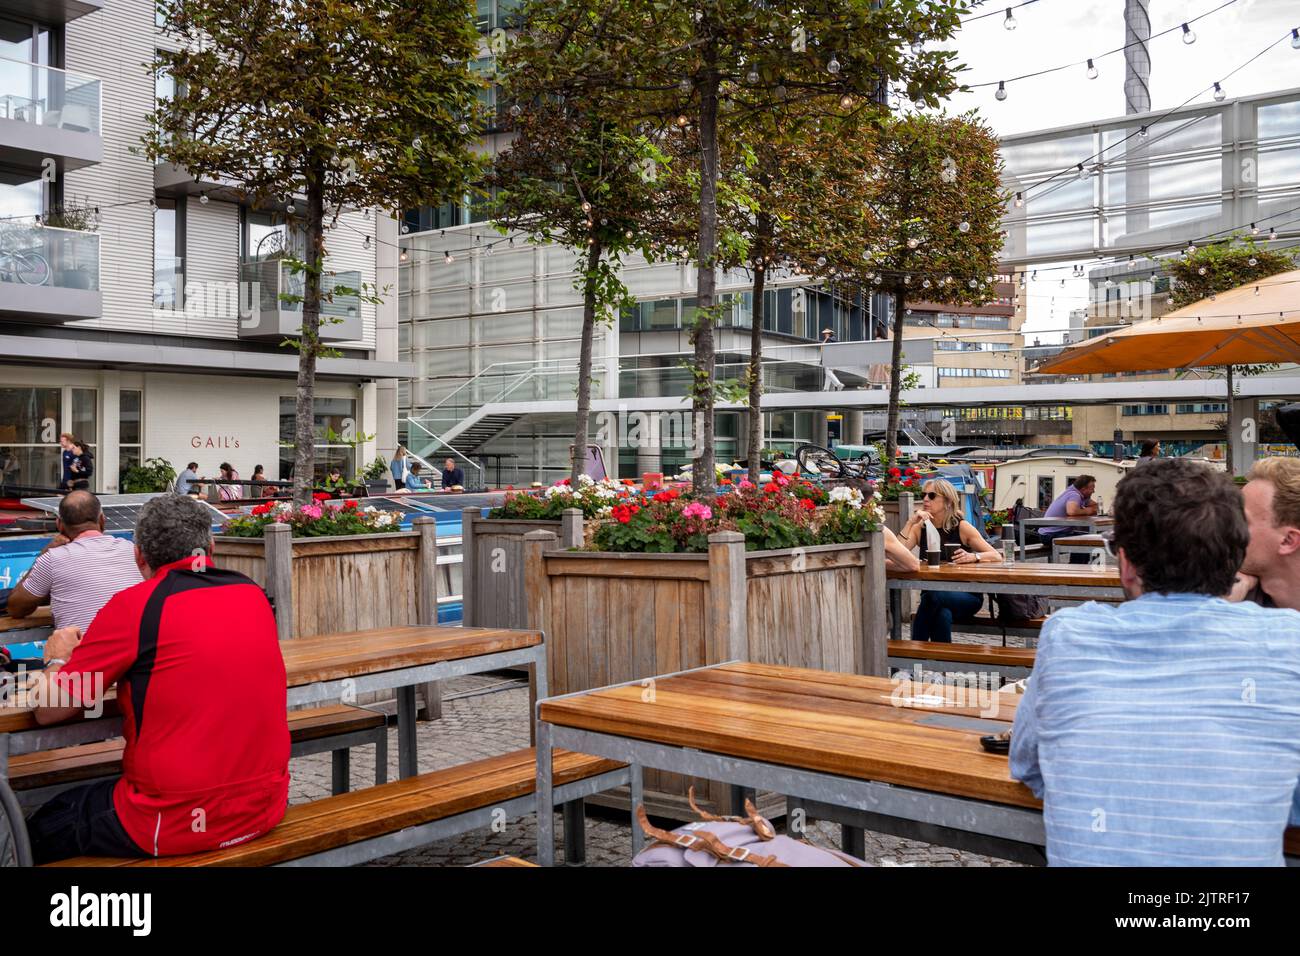 Paddington Basin, London. A regenerated area of Paddington, along the canal, with a walkway, cafes and restaurants along with modern apartments. Stock Photo